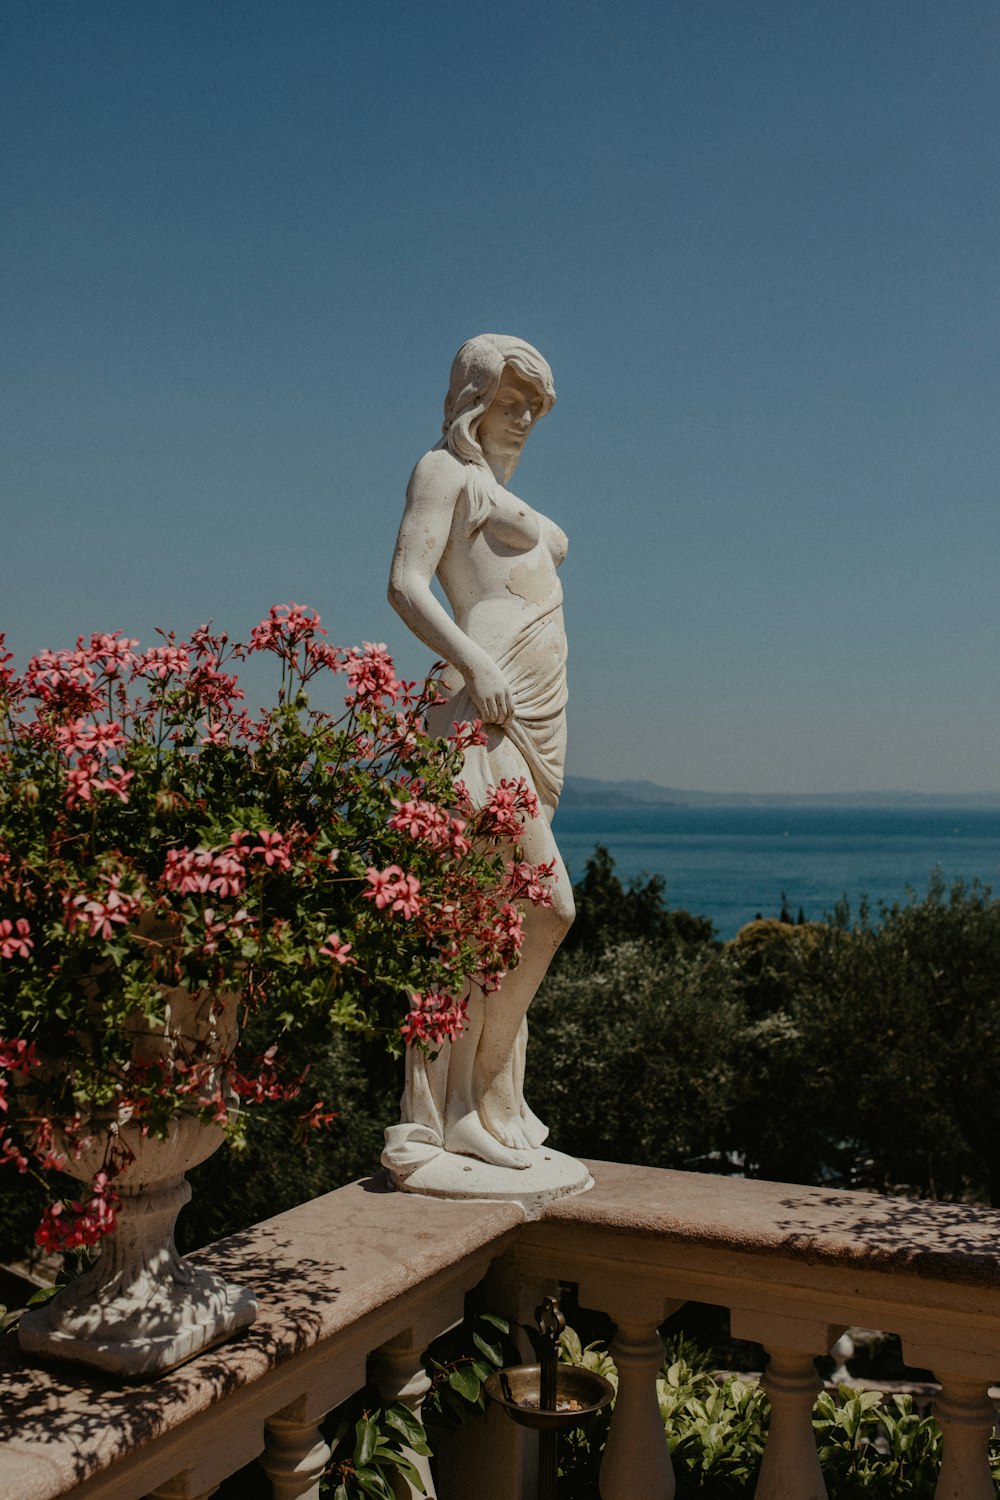 a statue of a person on a ledge overlooking a body of water